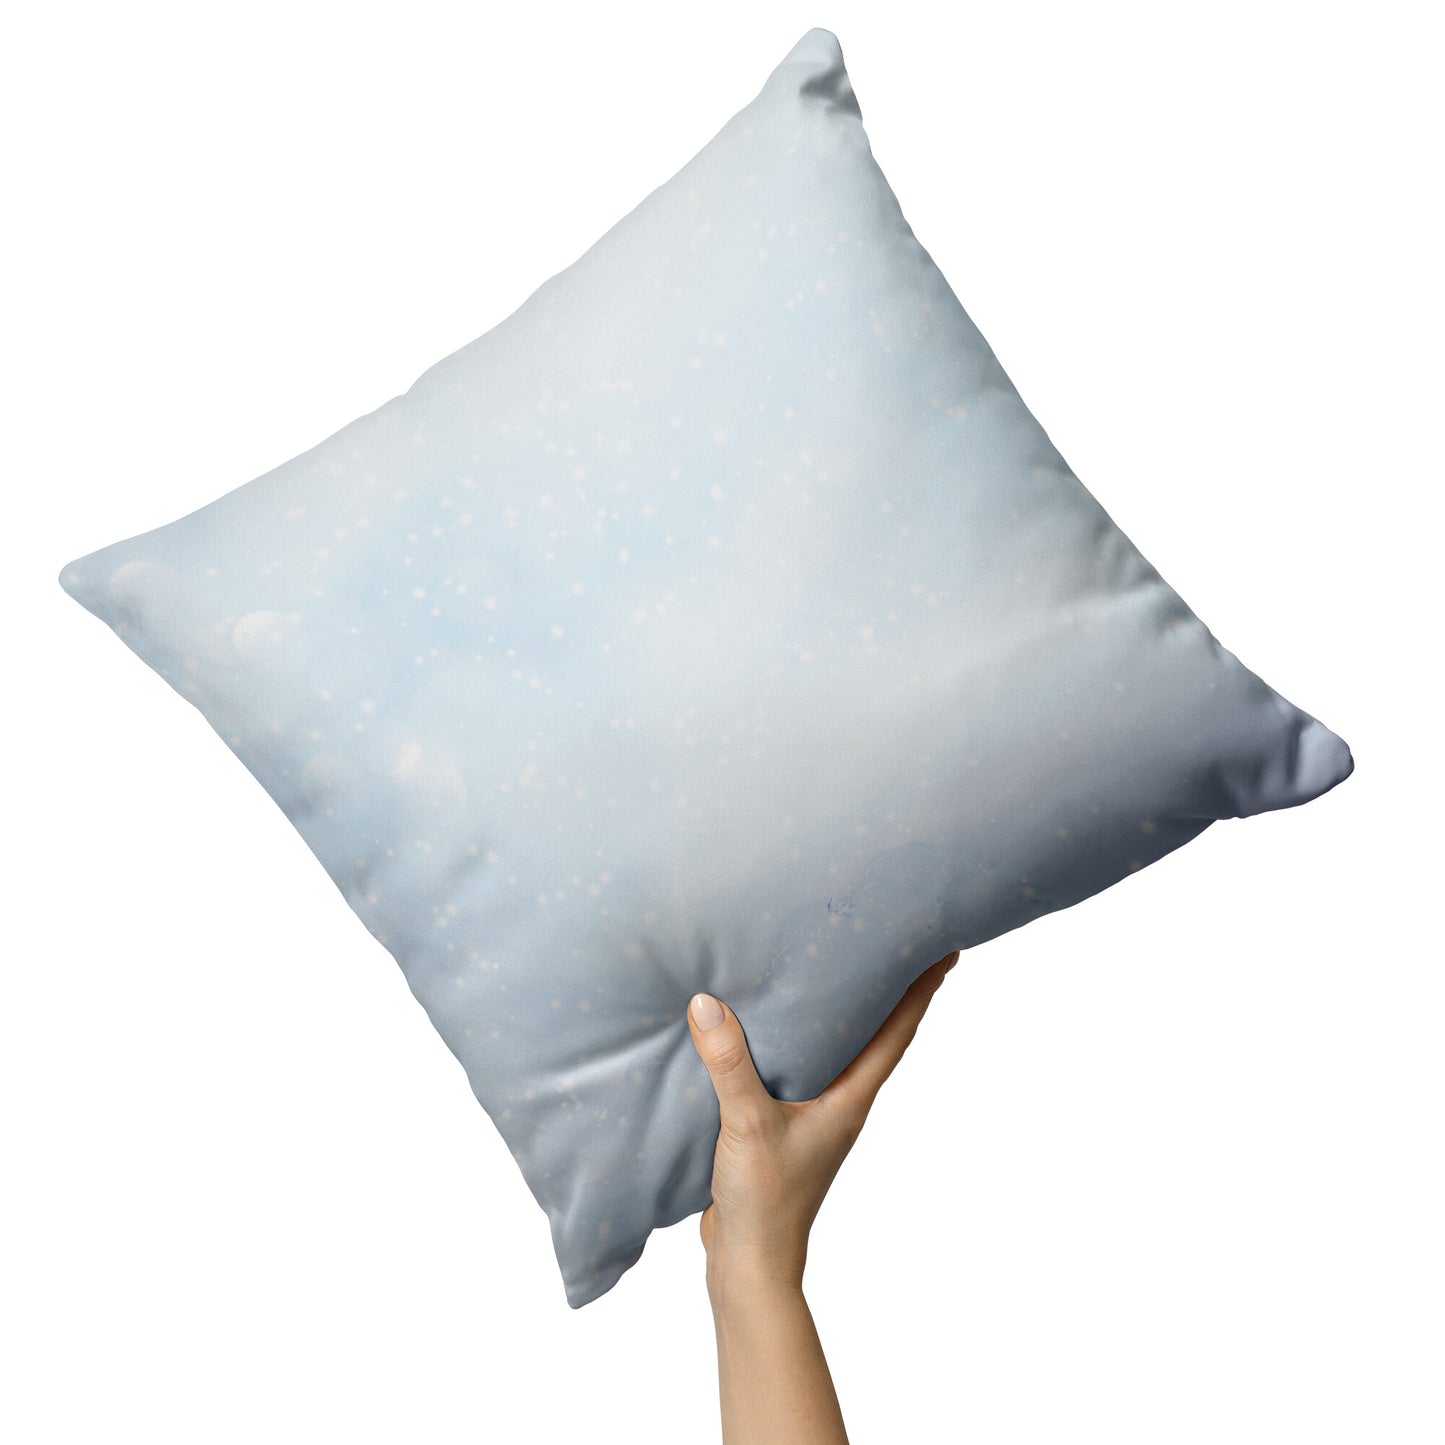 Let It Snow! Pillow - Signs and Seasons Gifts